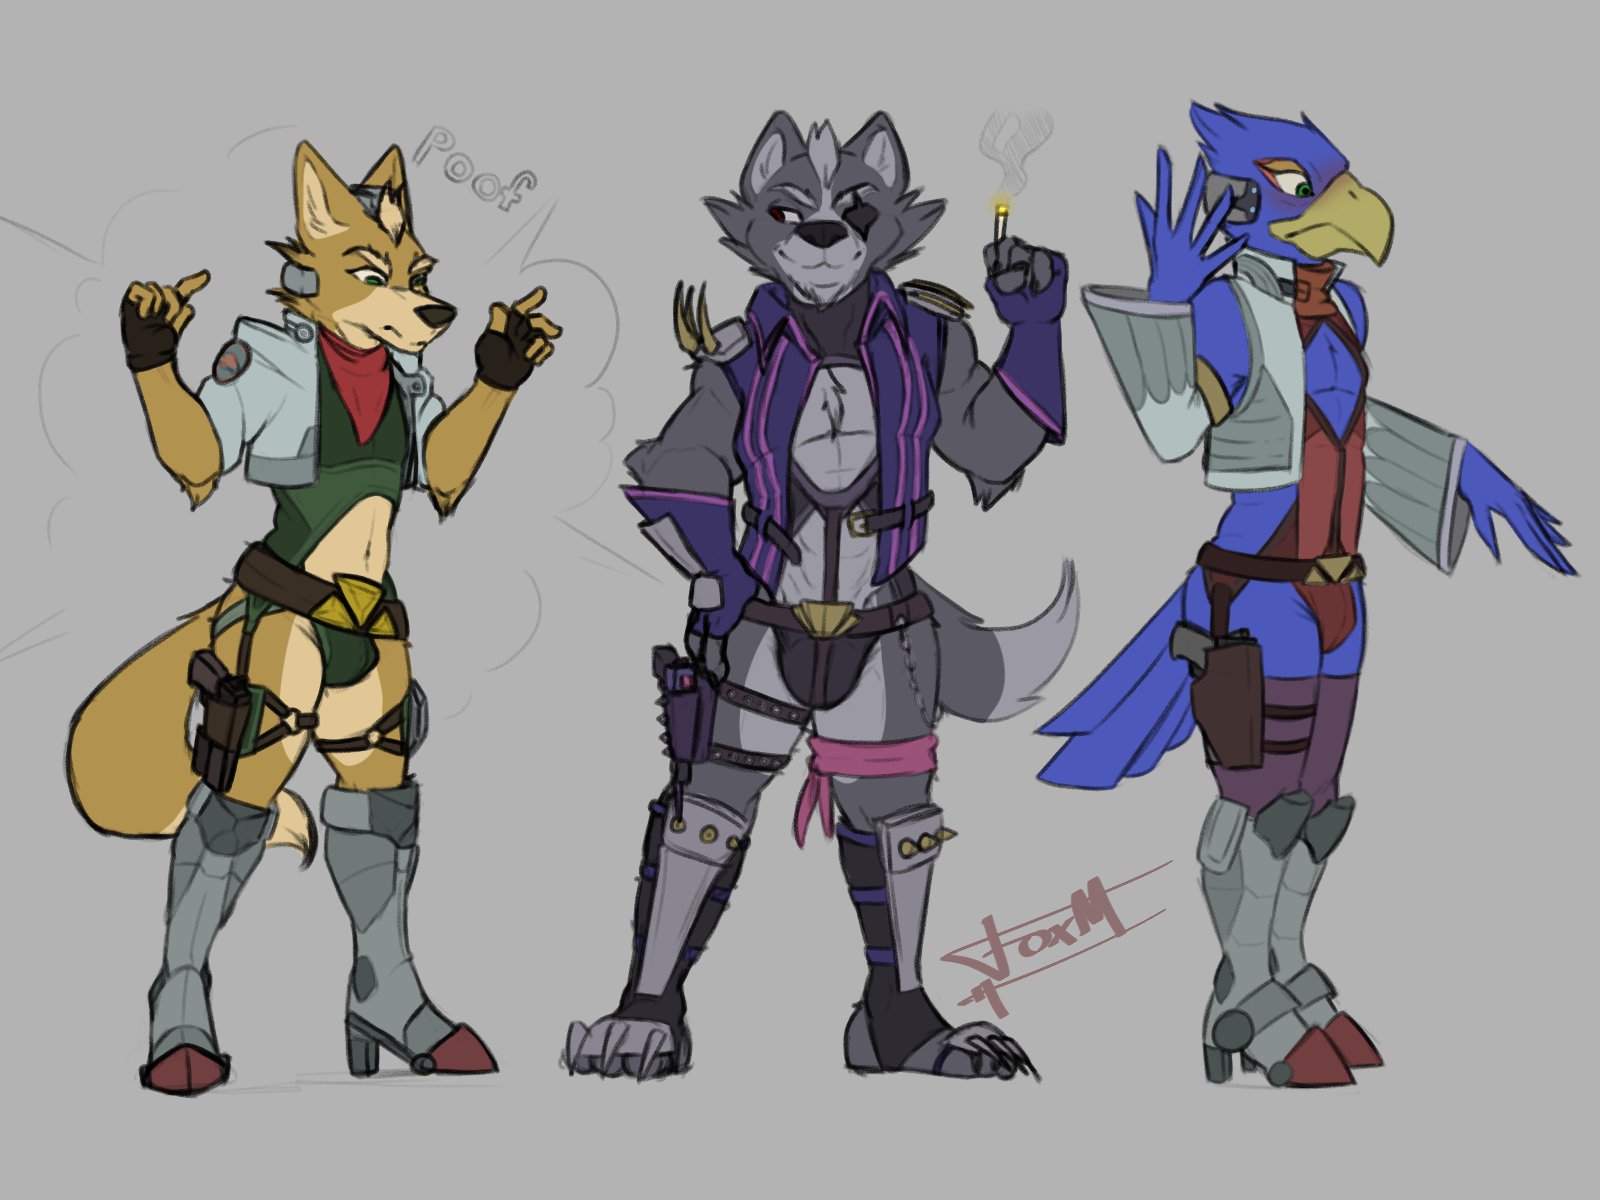 “[NSFW]

The Star Fox and Star Wolf crews had a sudden unif...